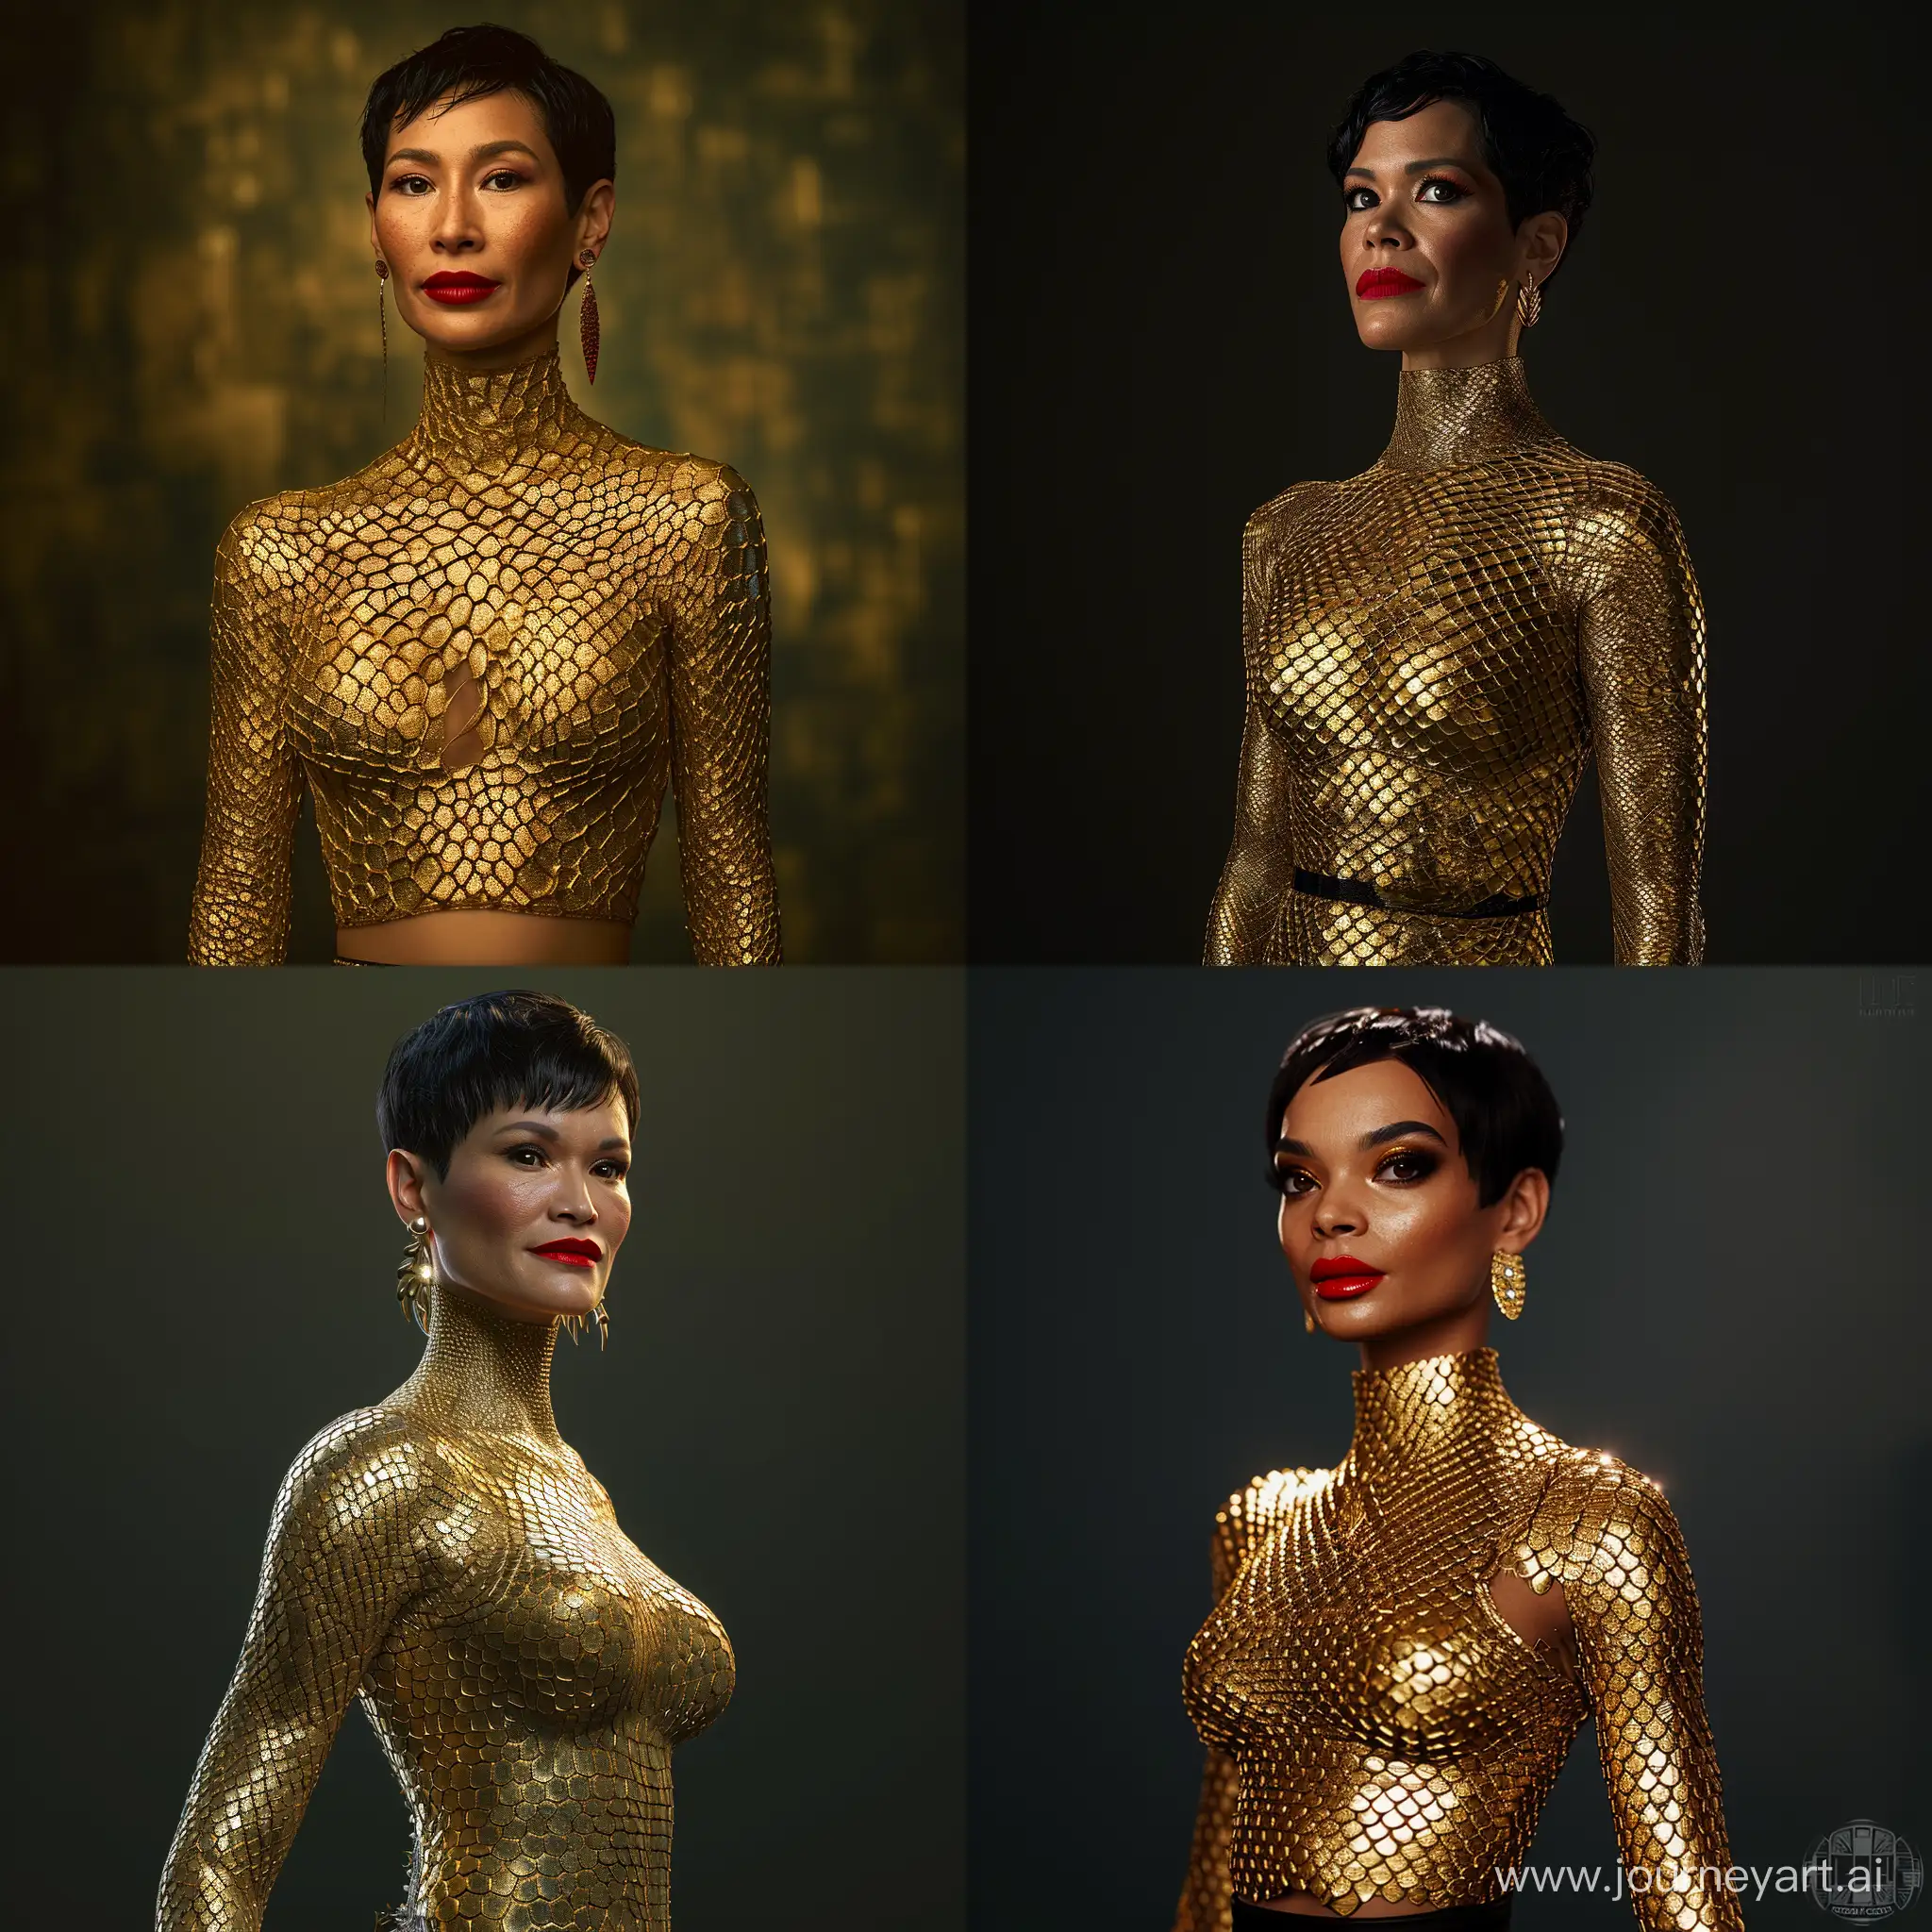 Golden-Scaled-Humanoid-with-Cinematic-Beauty